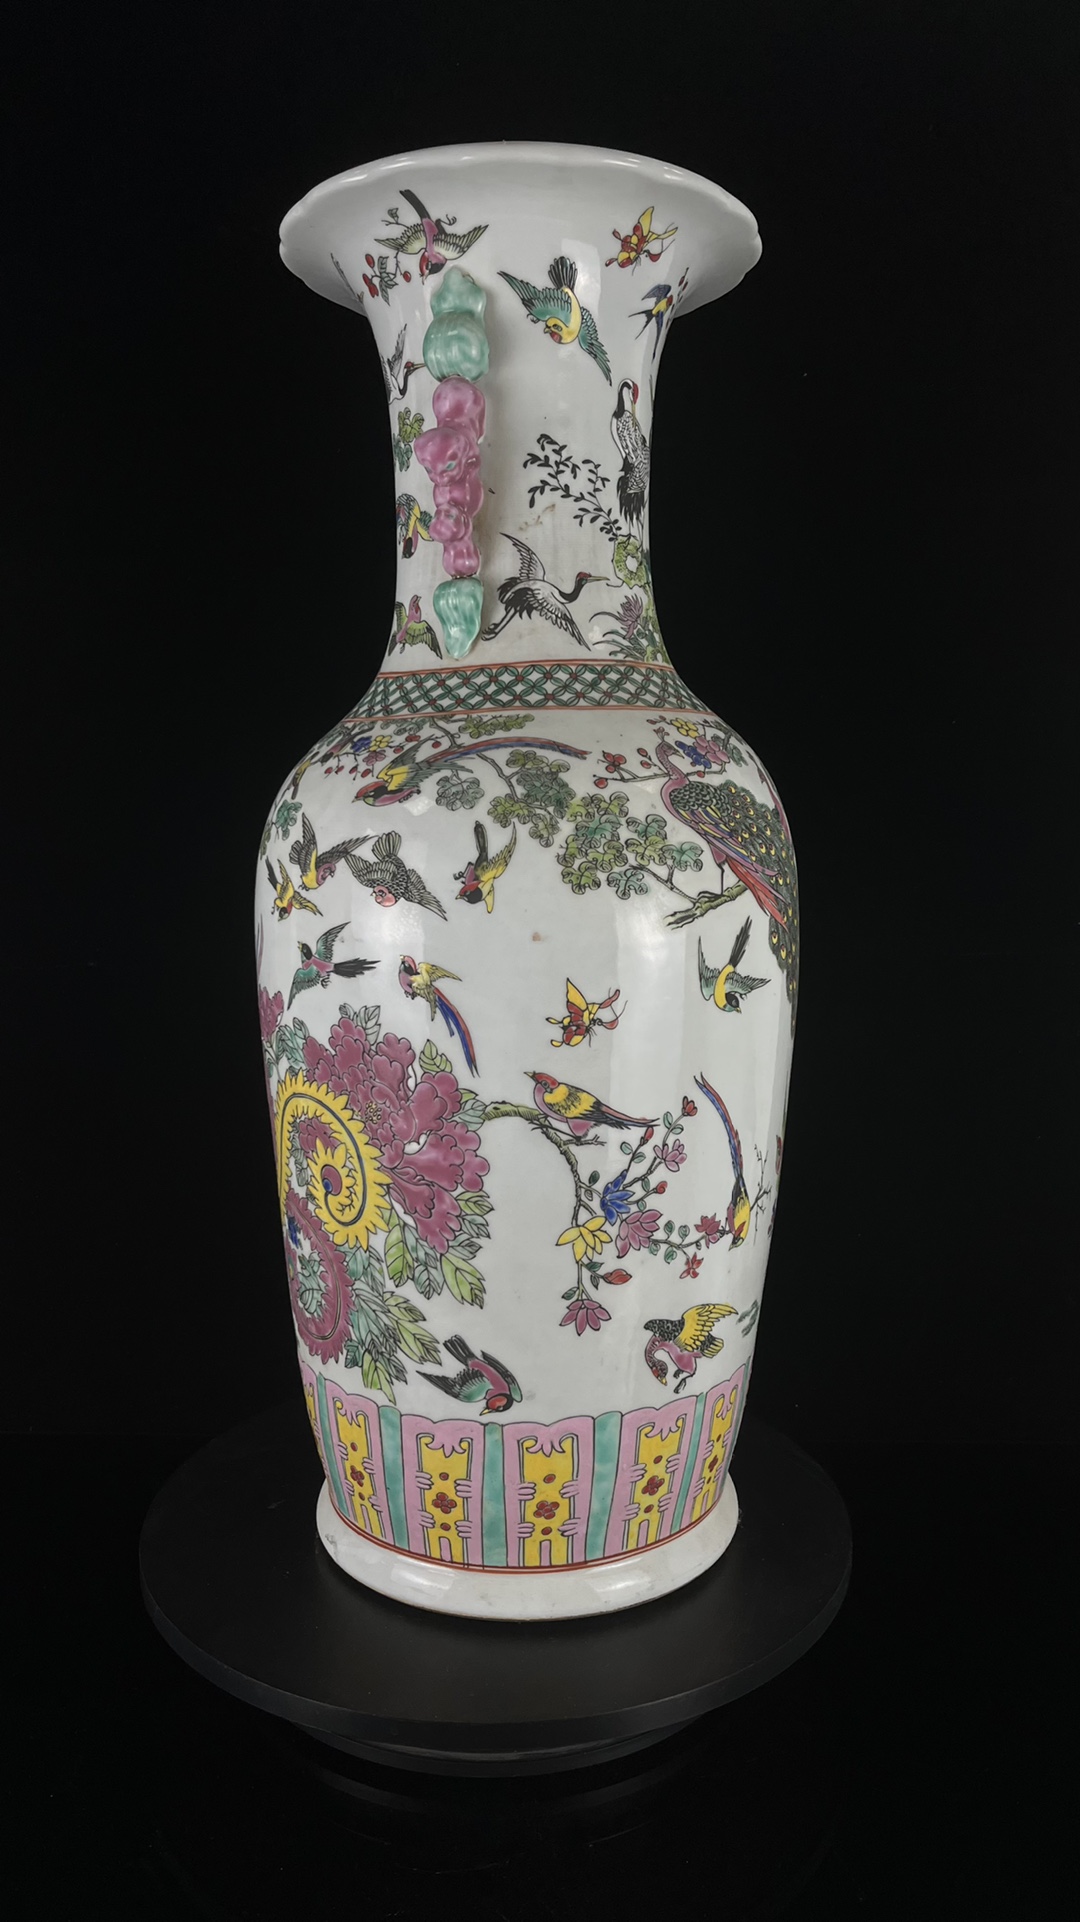 Large flower and bird vase made in the Kangxi period of the Qing Dynasty - Image 3 of 9